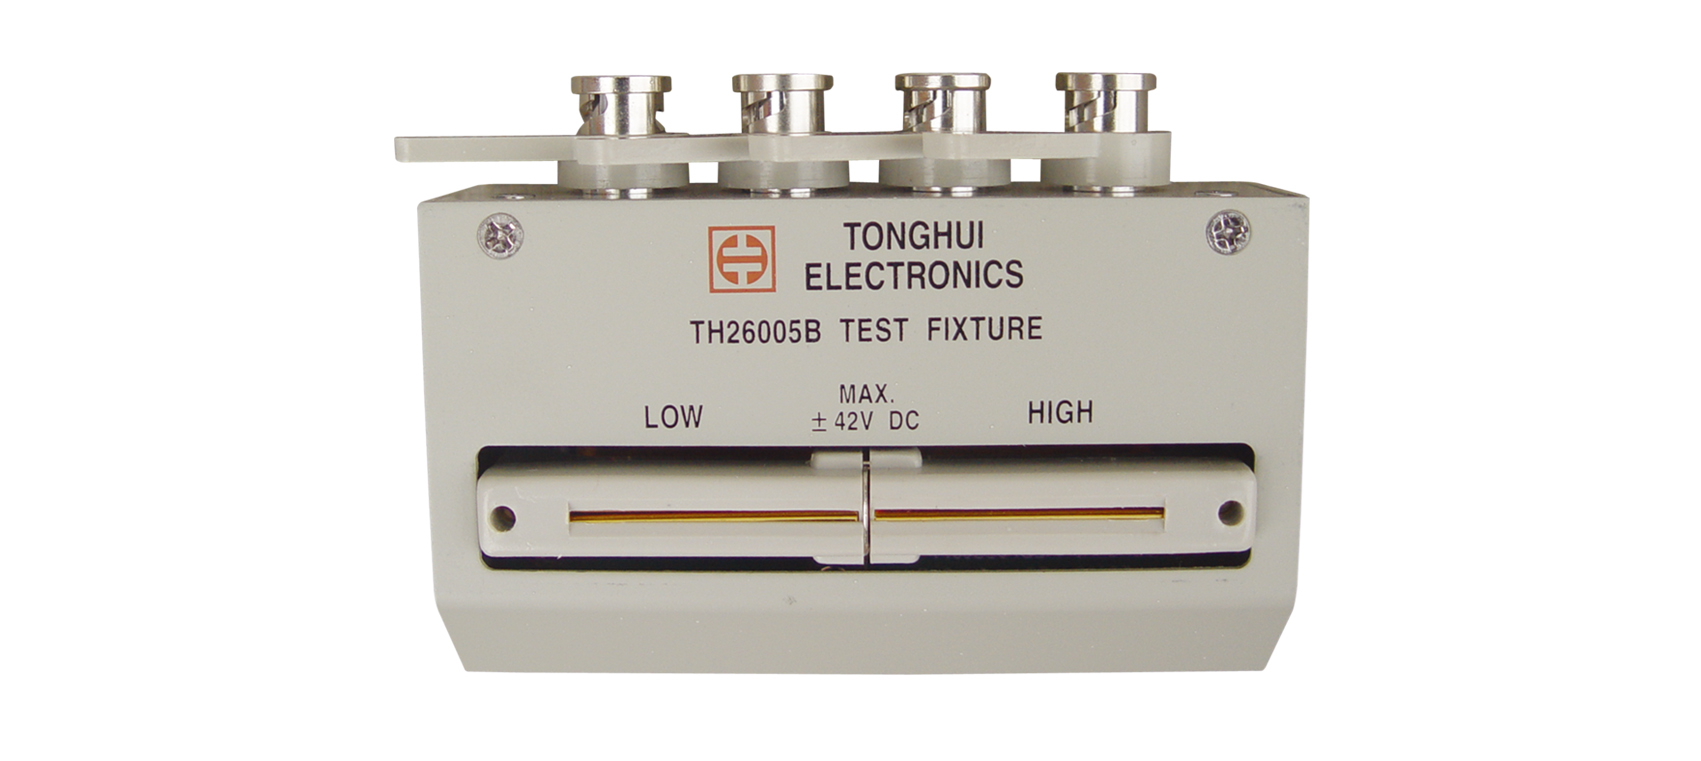 For Tonghui TH26001A 4-terminal LCR meter test fixture 